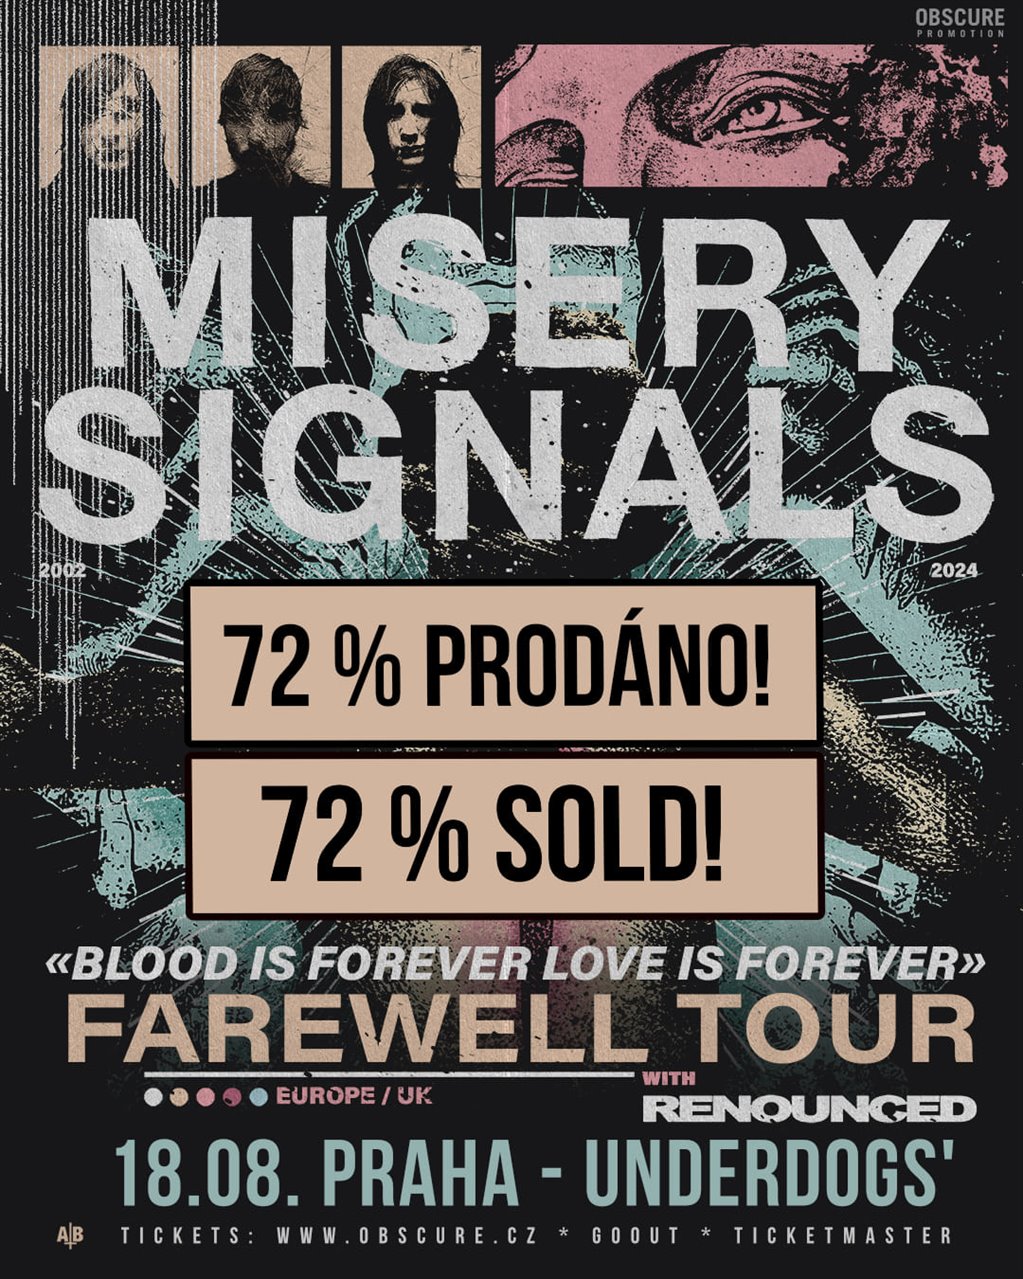 MISERY SIGNALS, RENOUNCED